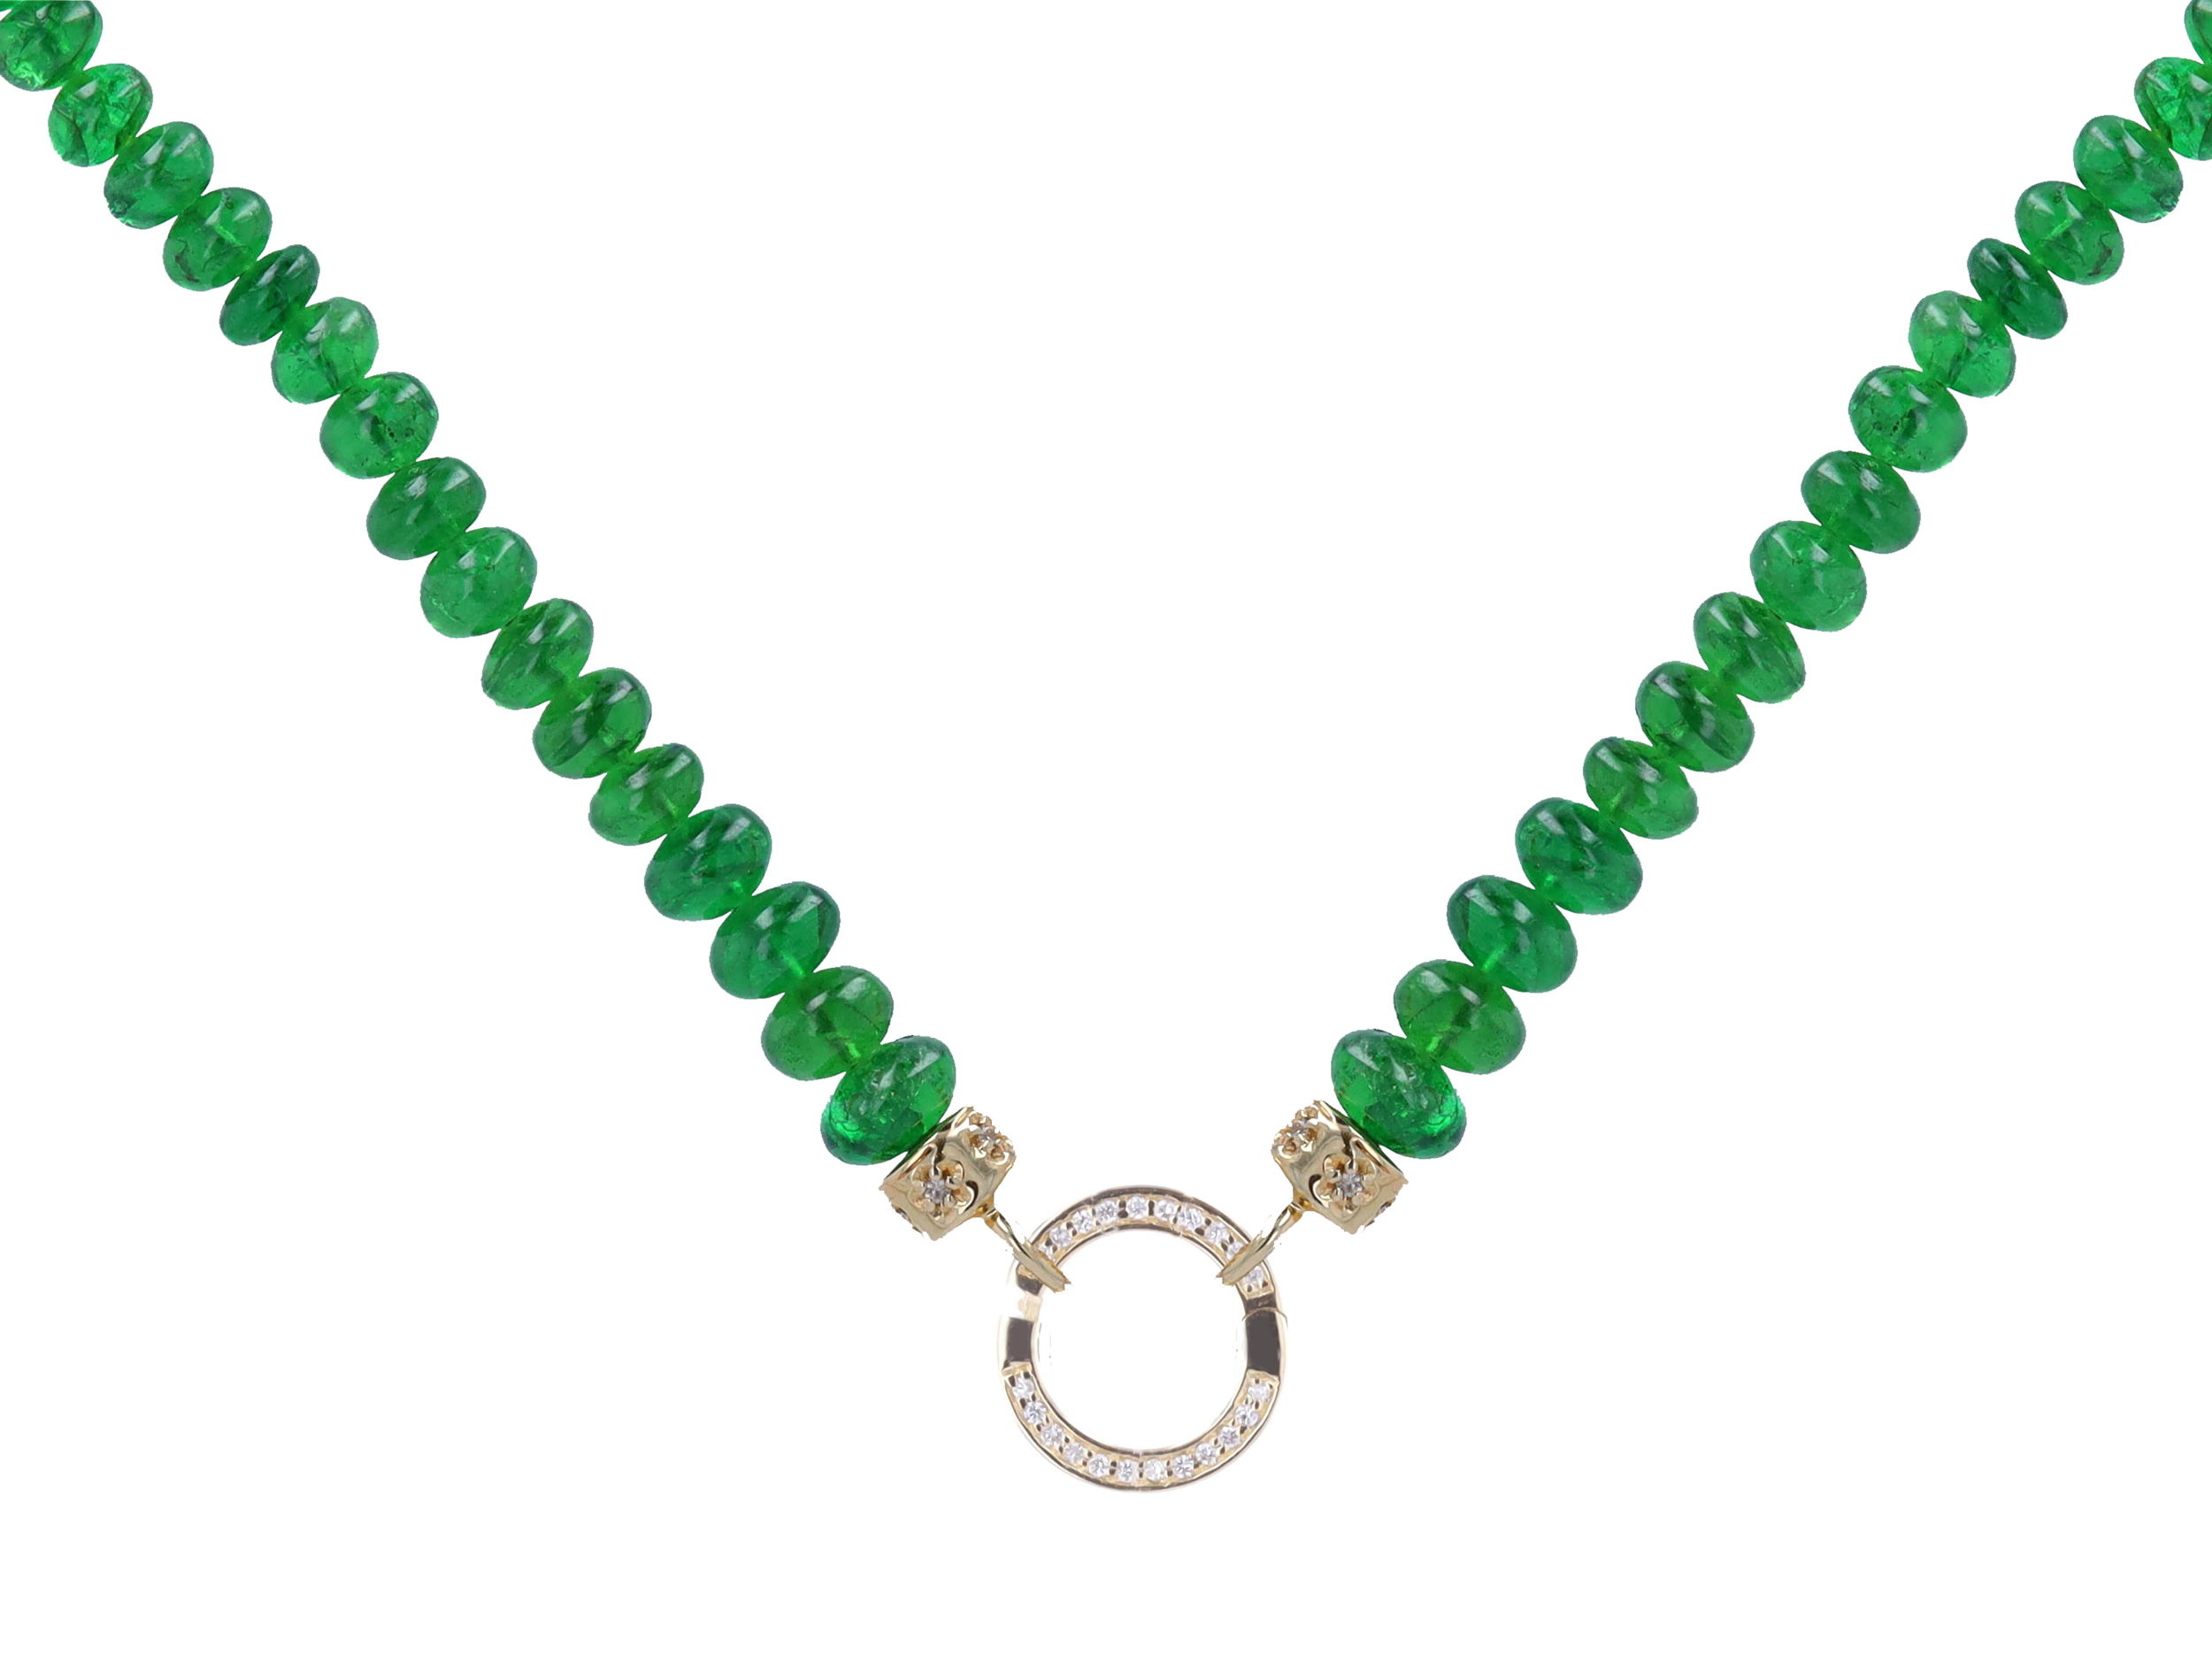 22" ~5mm Hand Polished Translucent Emerald Beaded Chain With 14k Gold Extension, and end Caps with Small Circle